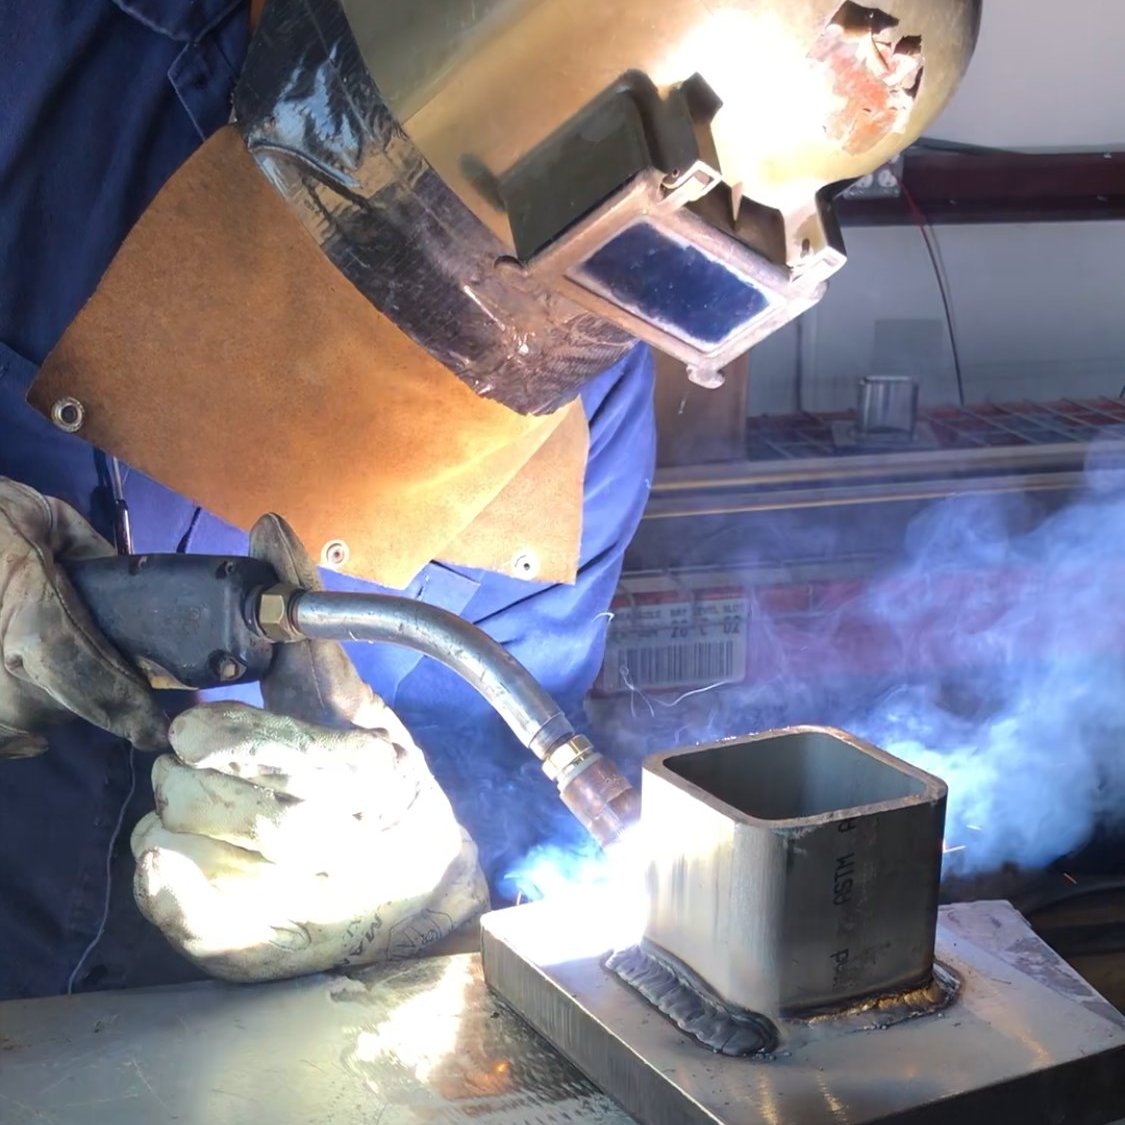 We provide turnkey welding services with our own Quality Control (QC), welding team, & supervisor. The services we offer are Cost Plus or Fix Bid! 832-230-0100